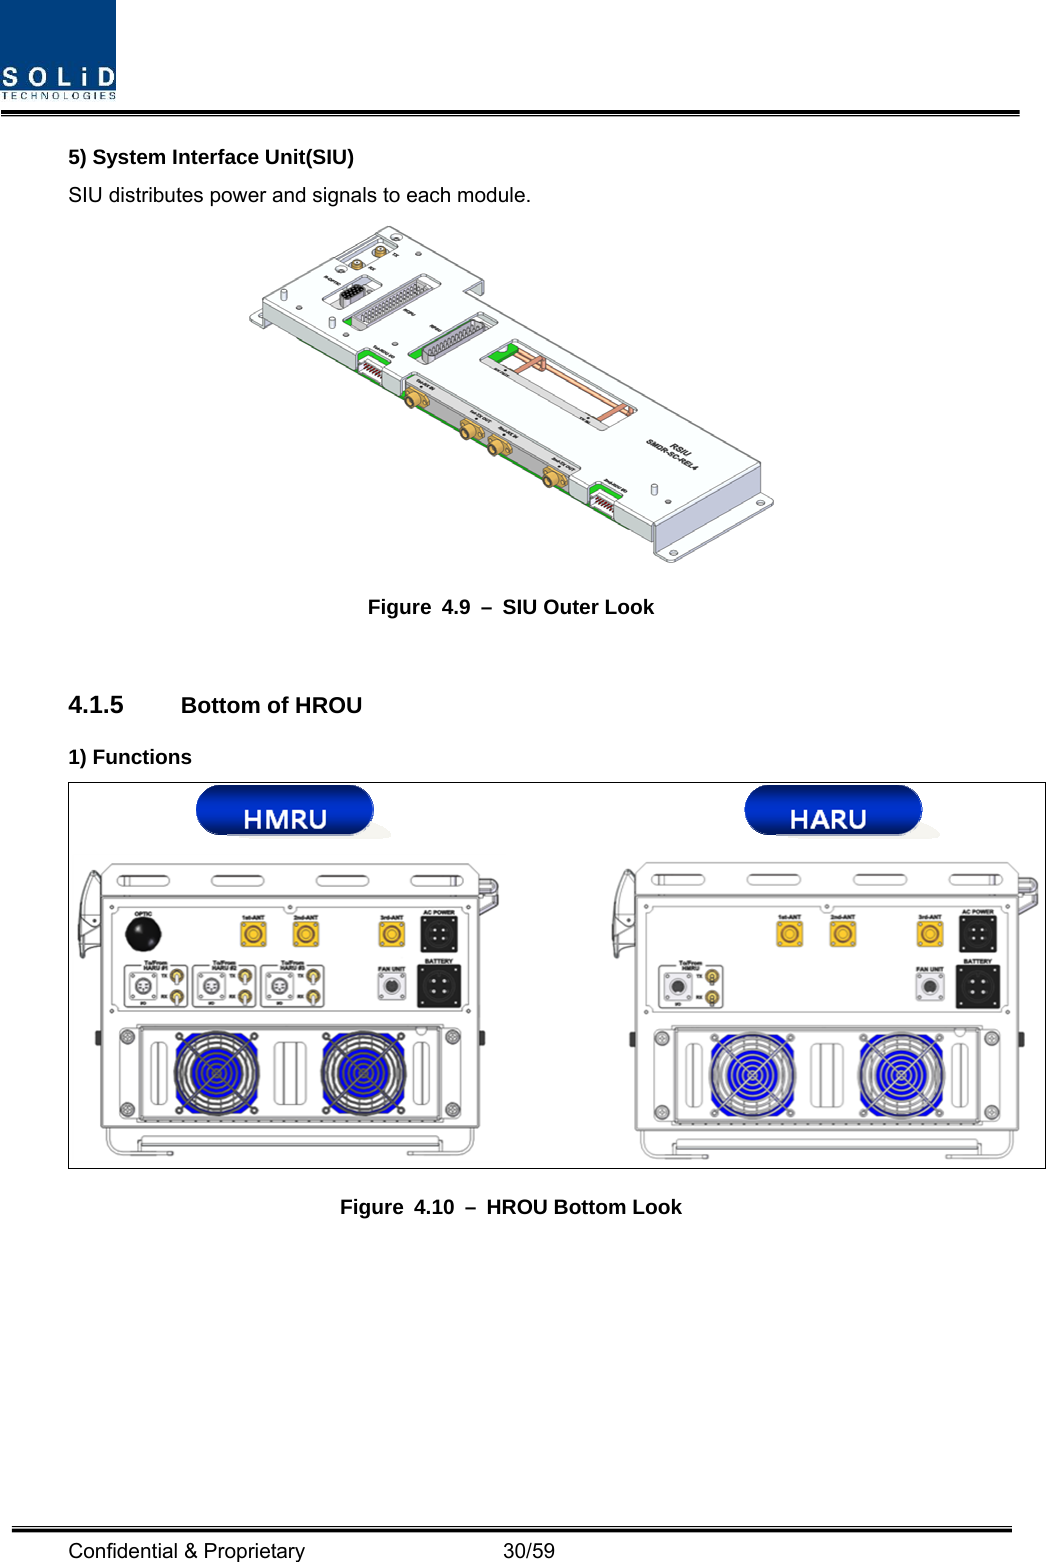  Confidential &amp; Proprietary                   30/59 5) System Interface Unit(SIU) SIU distributes power and signals to each module.  Figure 4.9 – SIU Outer Look  4.1.5  Bottom of HROU 1) Functions  Figure 4.10 – HROU Bottom Look 